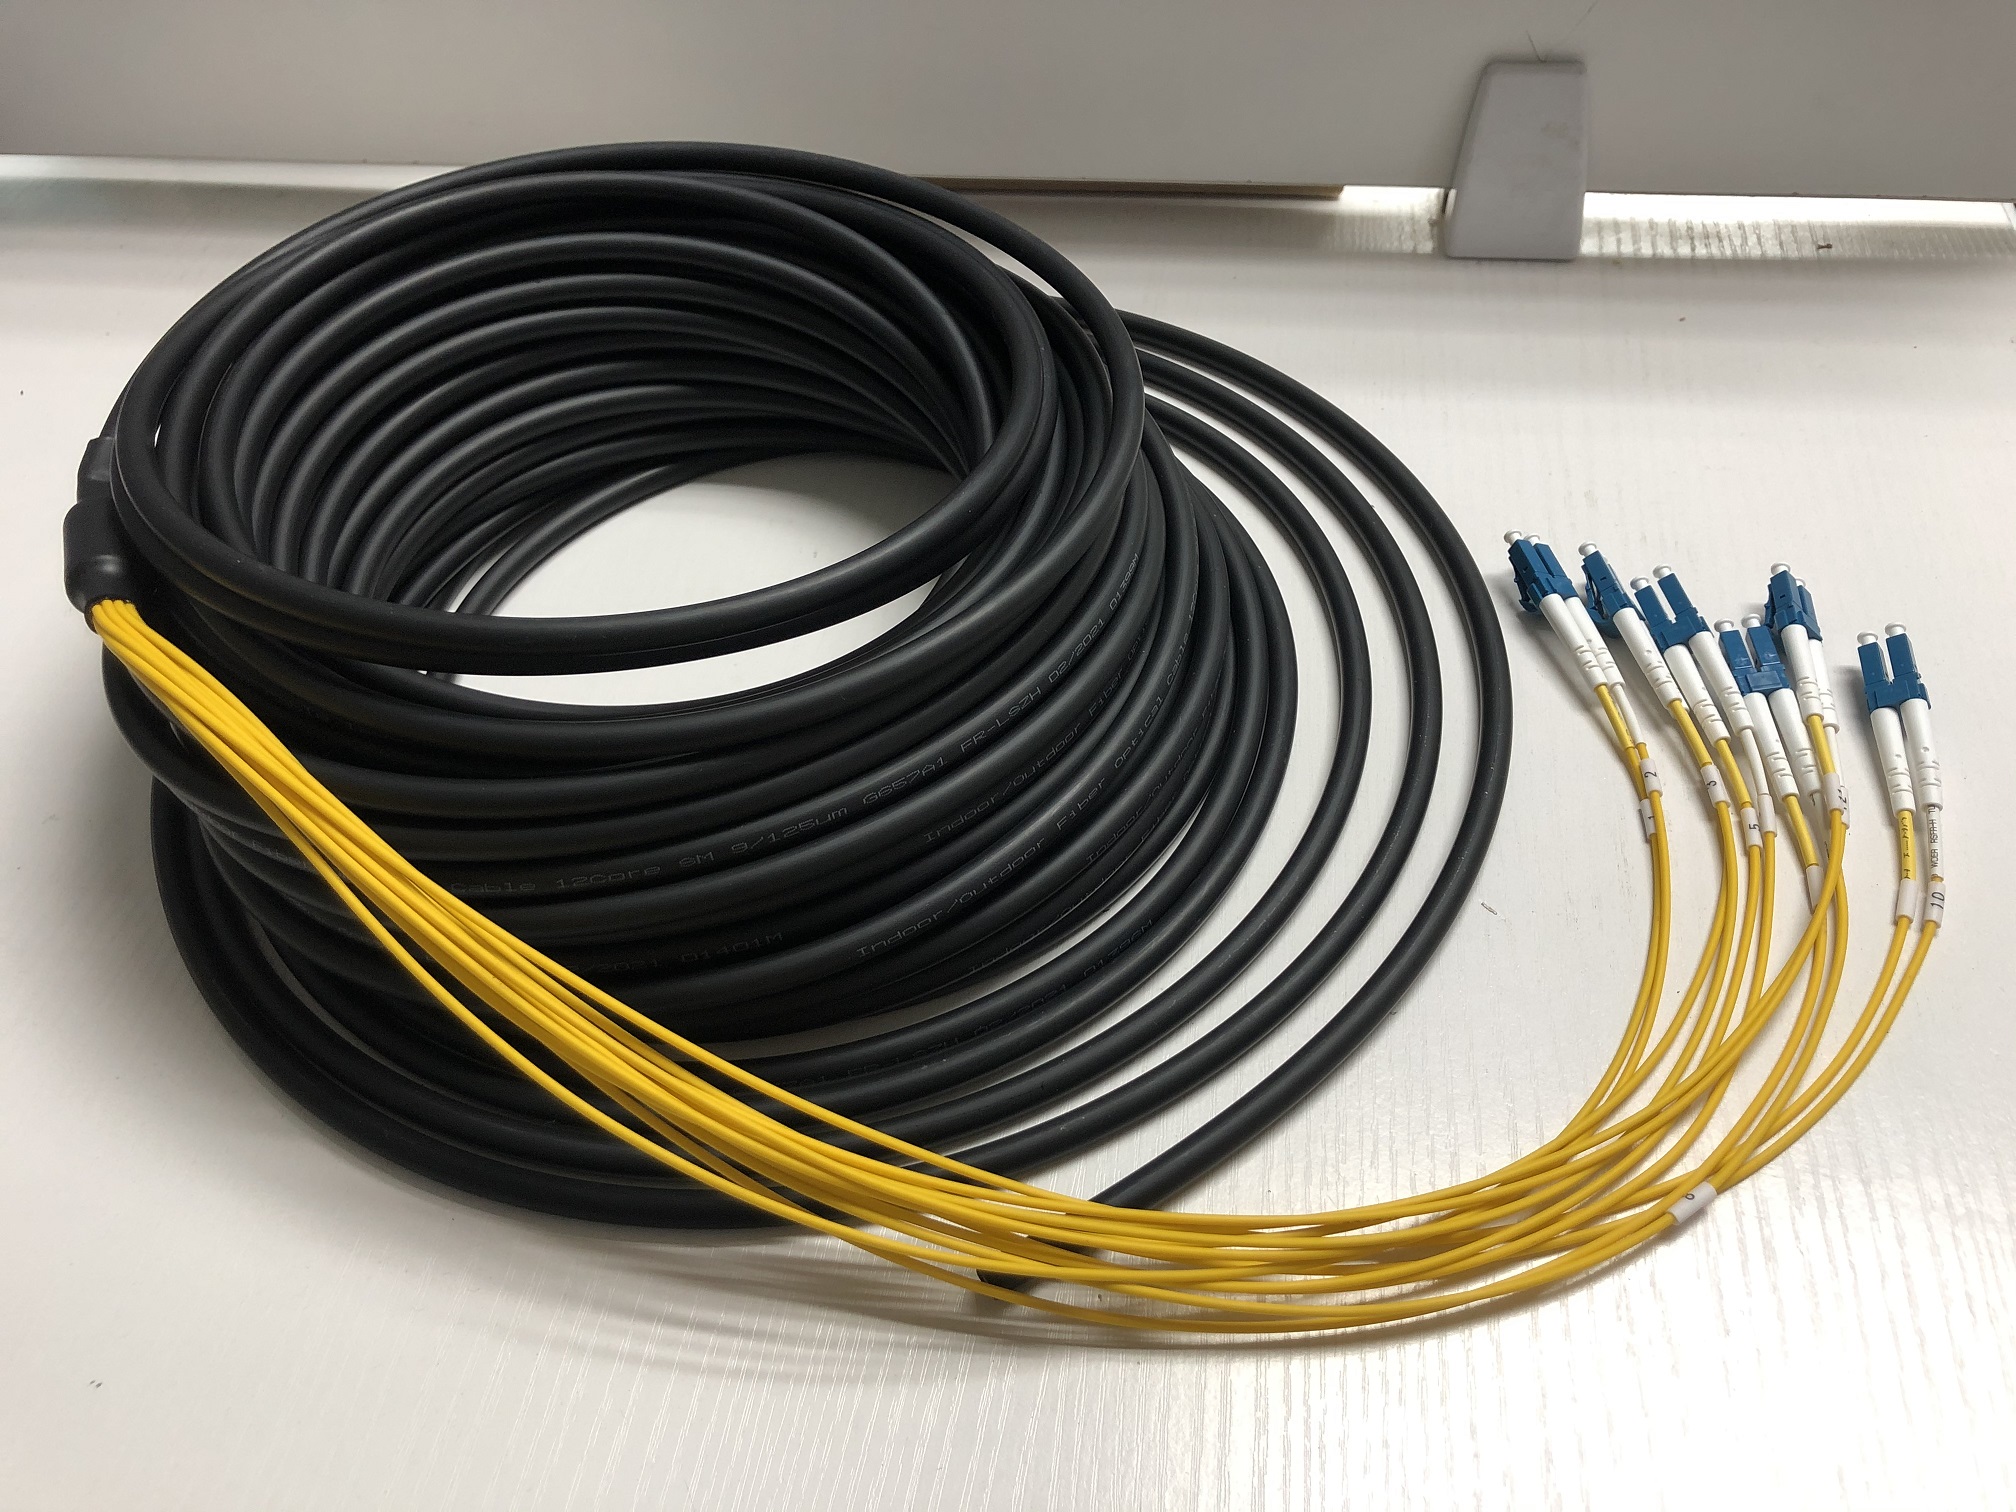 Lc To Lc Fiber Patch Cord